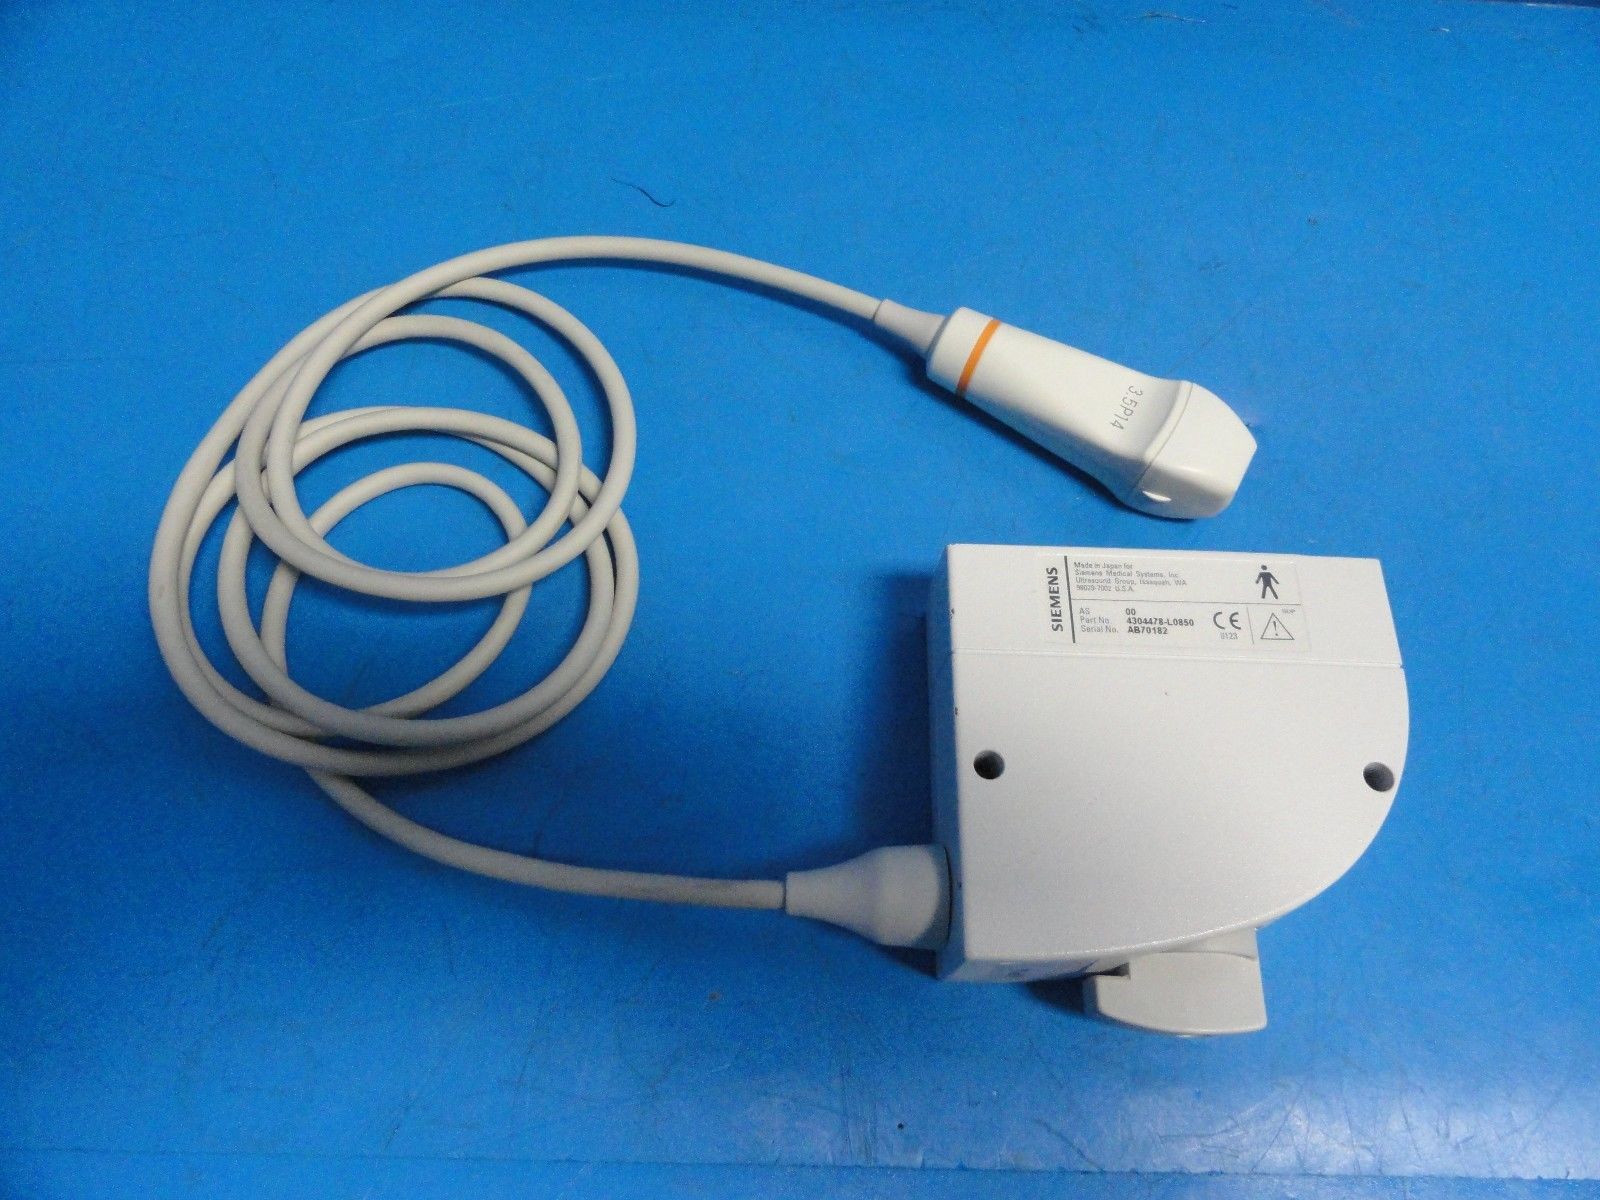 Siemens 3.5P14 P/N 4304478-L0850 Phased Array 3.5MHz Ultrasound Probe (8942) DIAGNOSTIC ULTRASOUND MACHINES FOR SALE